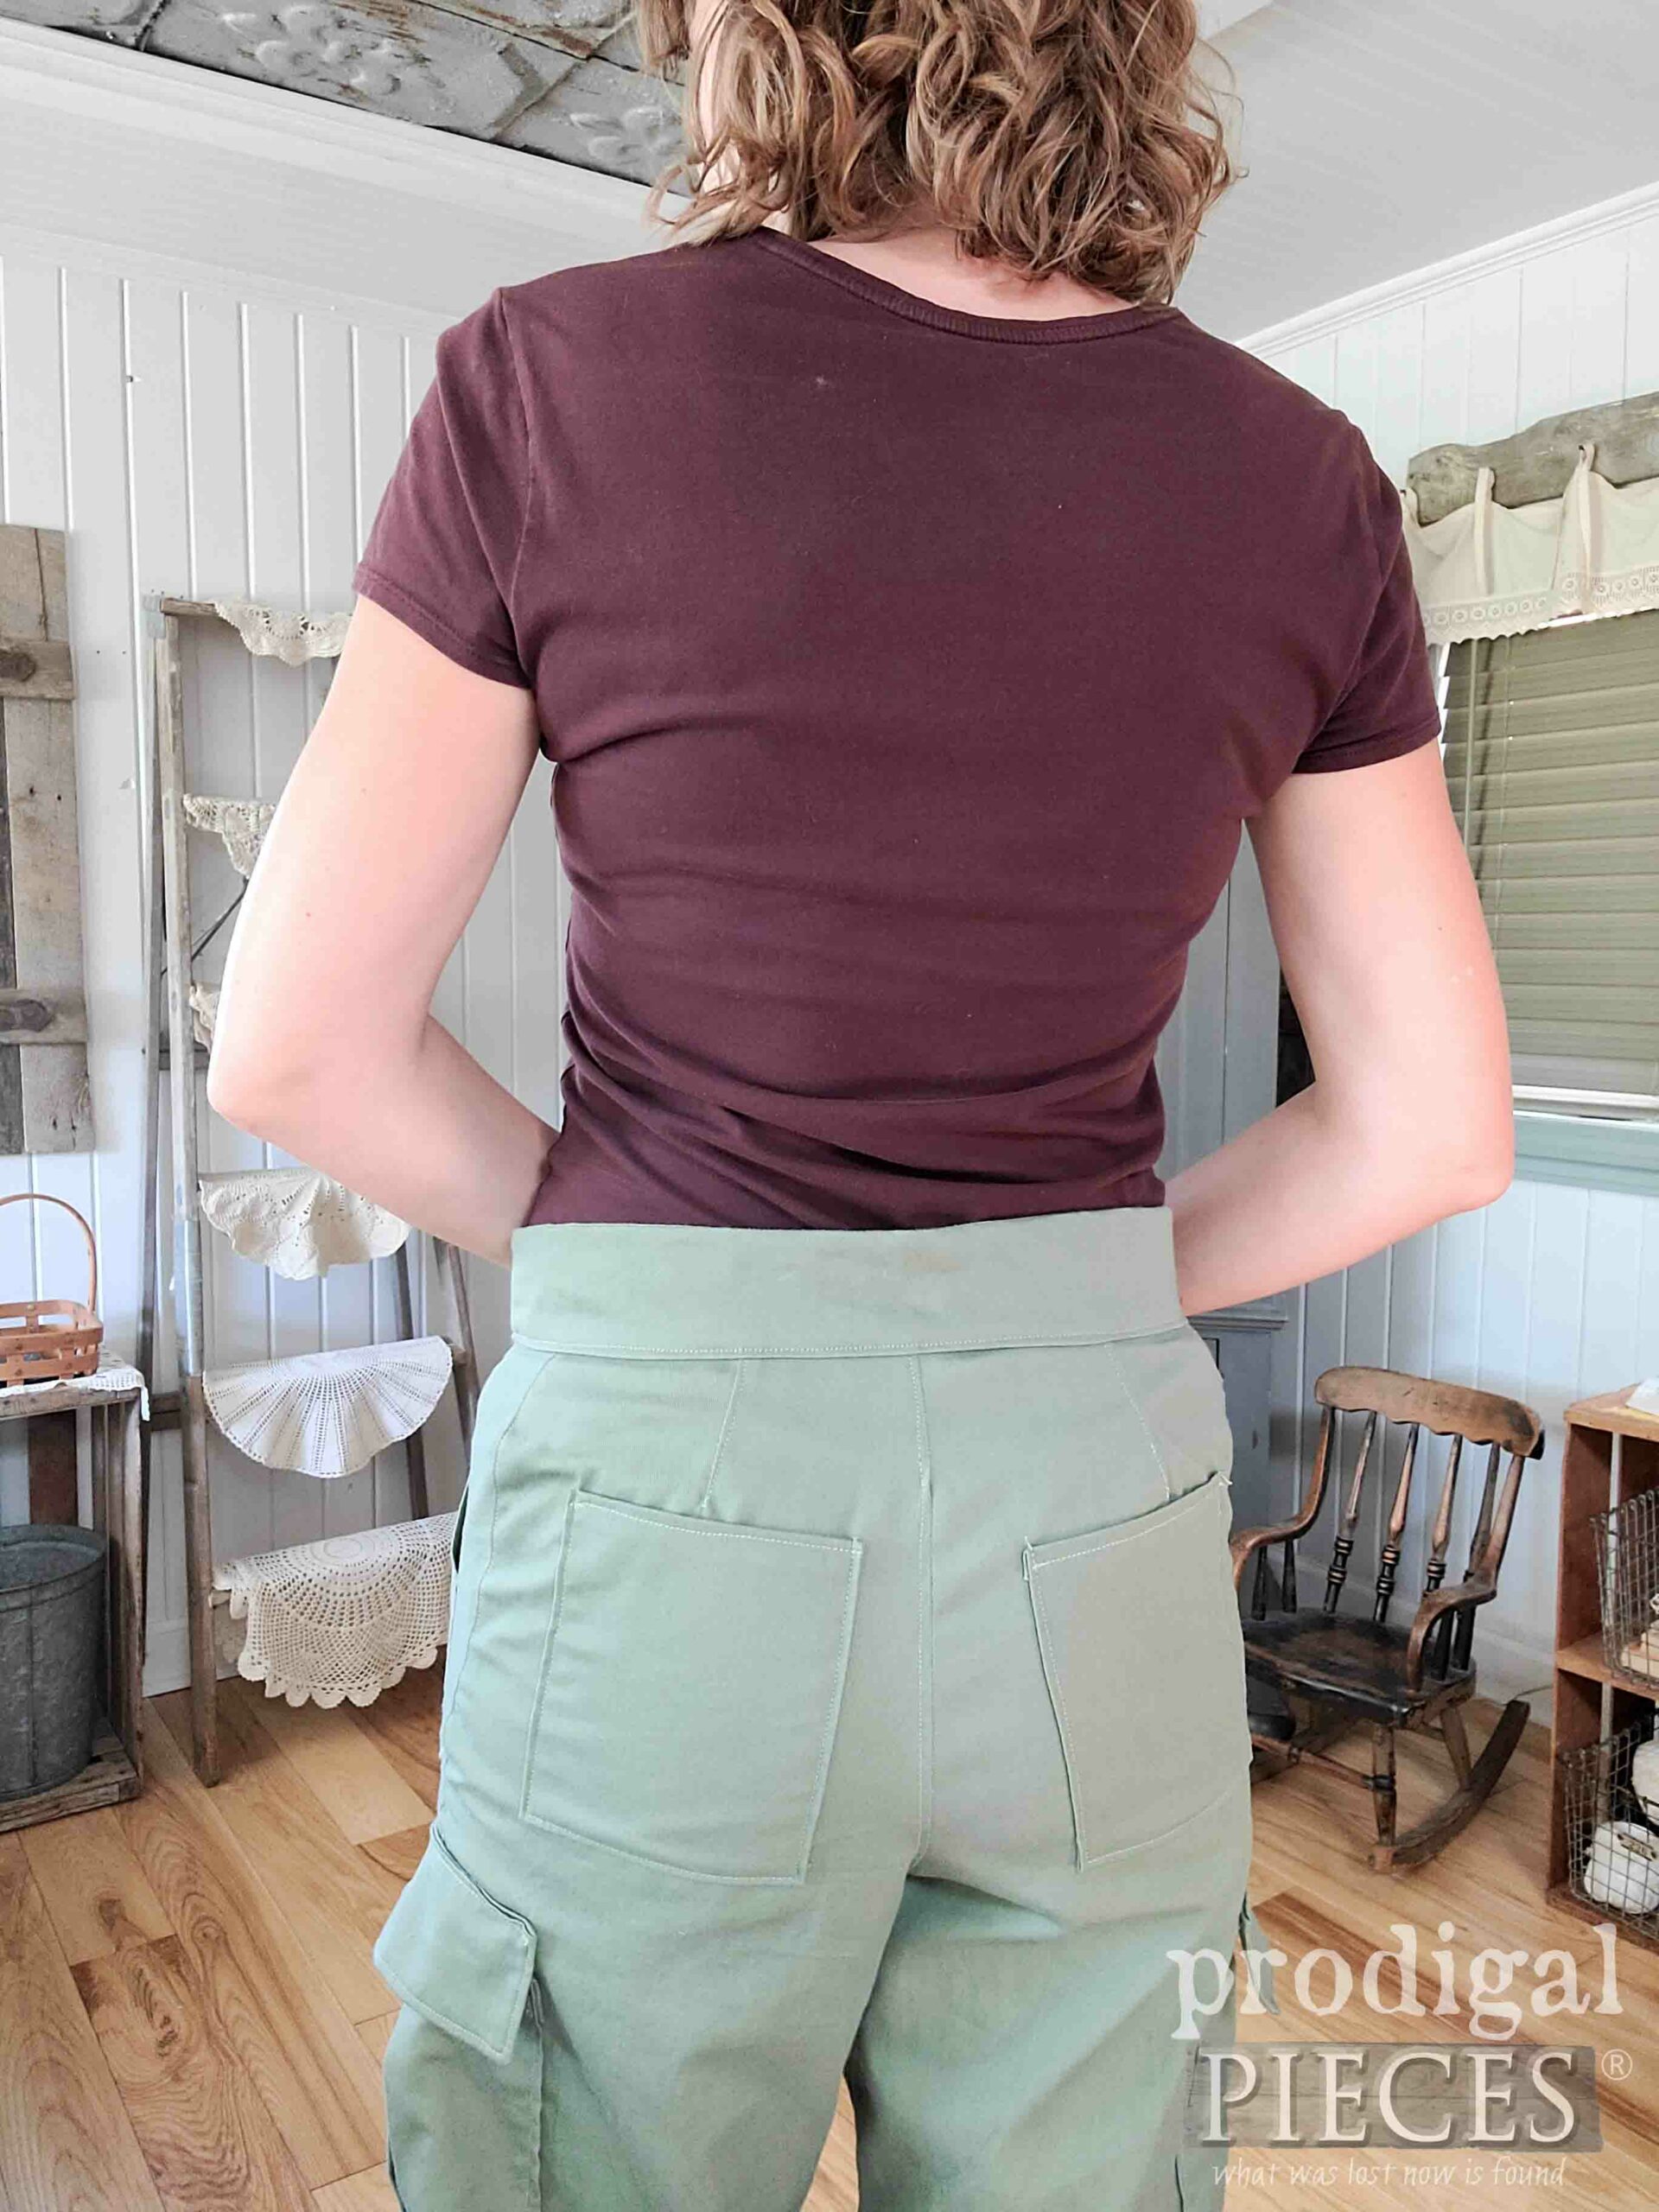 Back Pockets of Refashioned Cargo Pants by Larissa of Prodigal Pieces | prodigalpieces.com #prodigalpieces